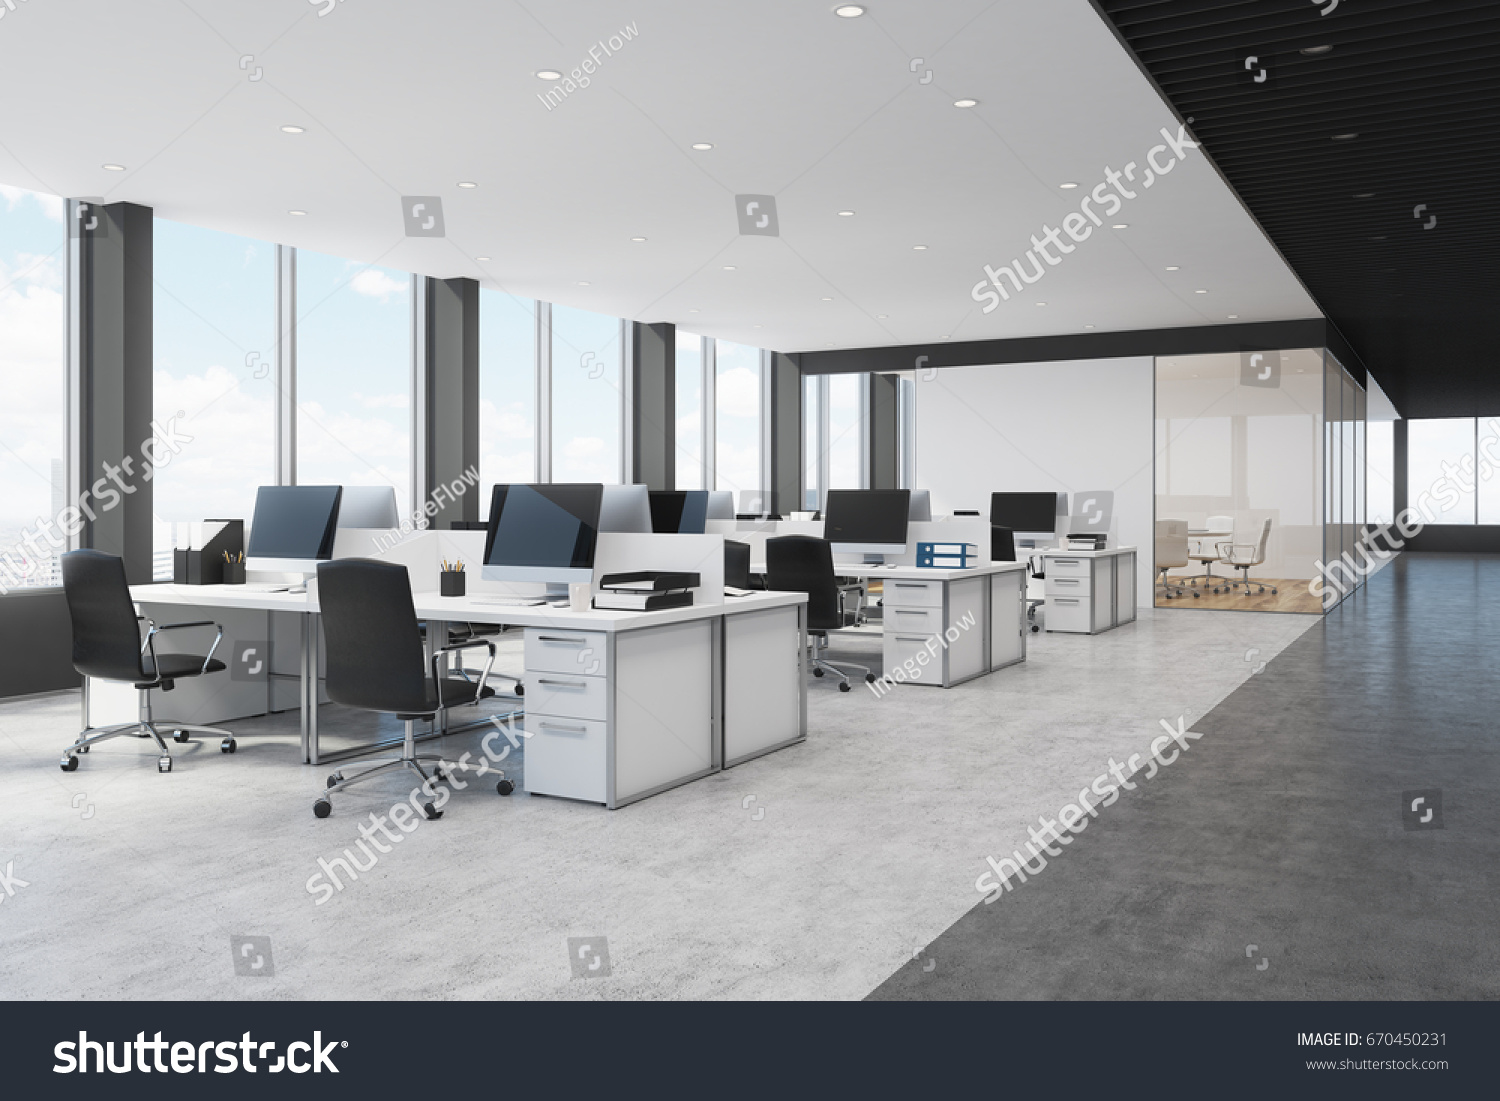 stock-photo-side-view-of-white-and-black-open-space-office-interior-with-rows-of-computer-tables-with-desktops-670450231.jpg